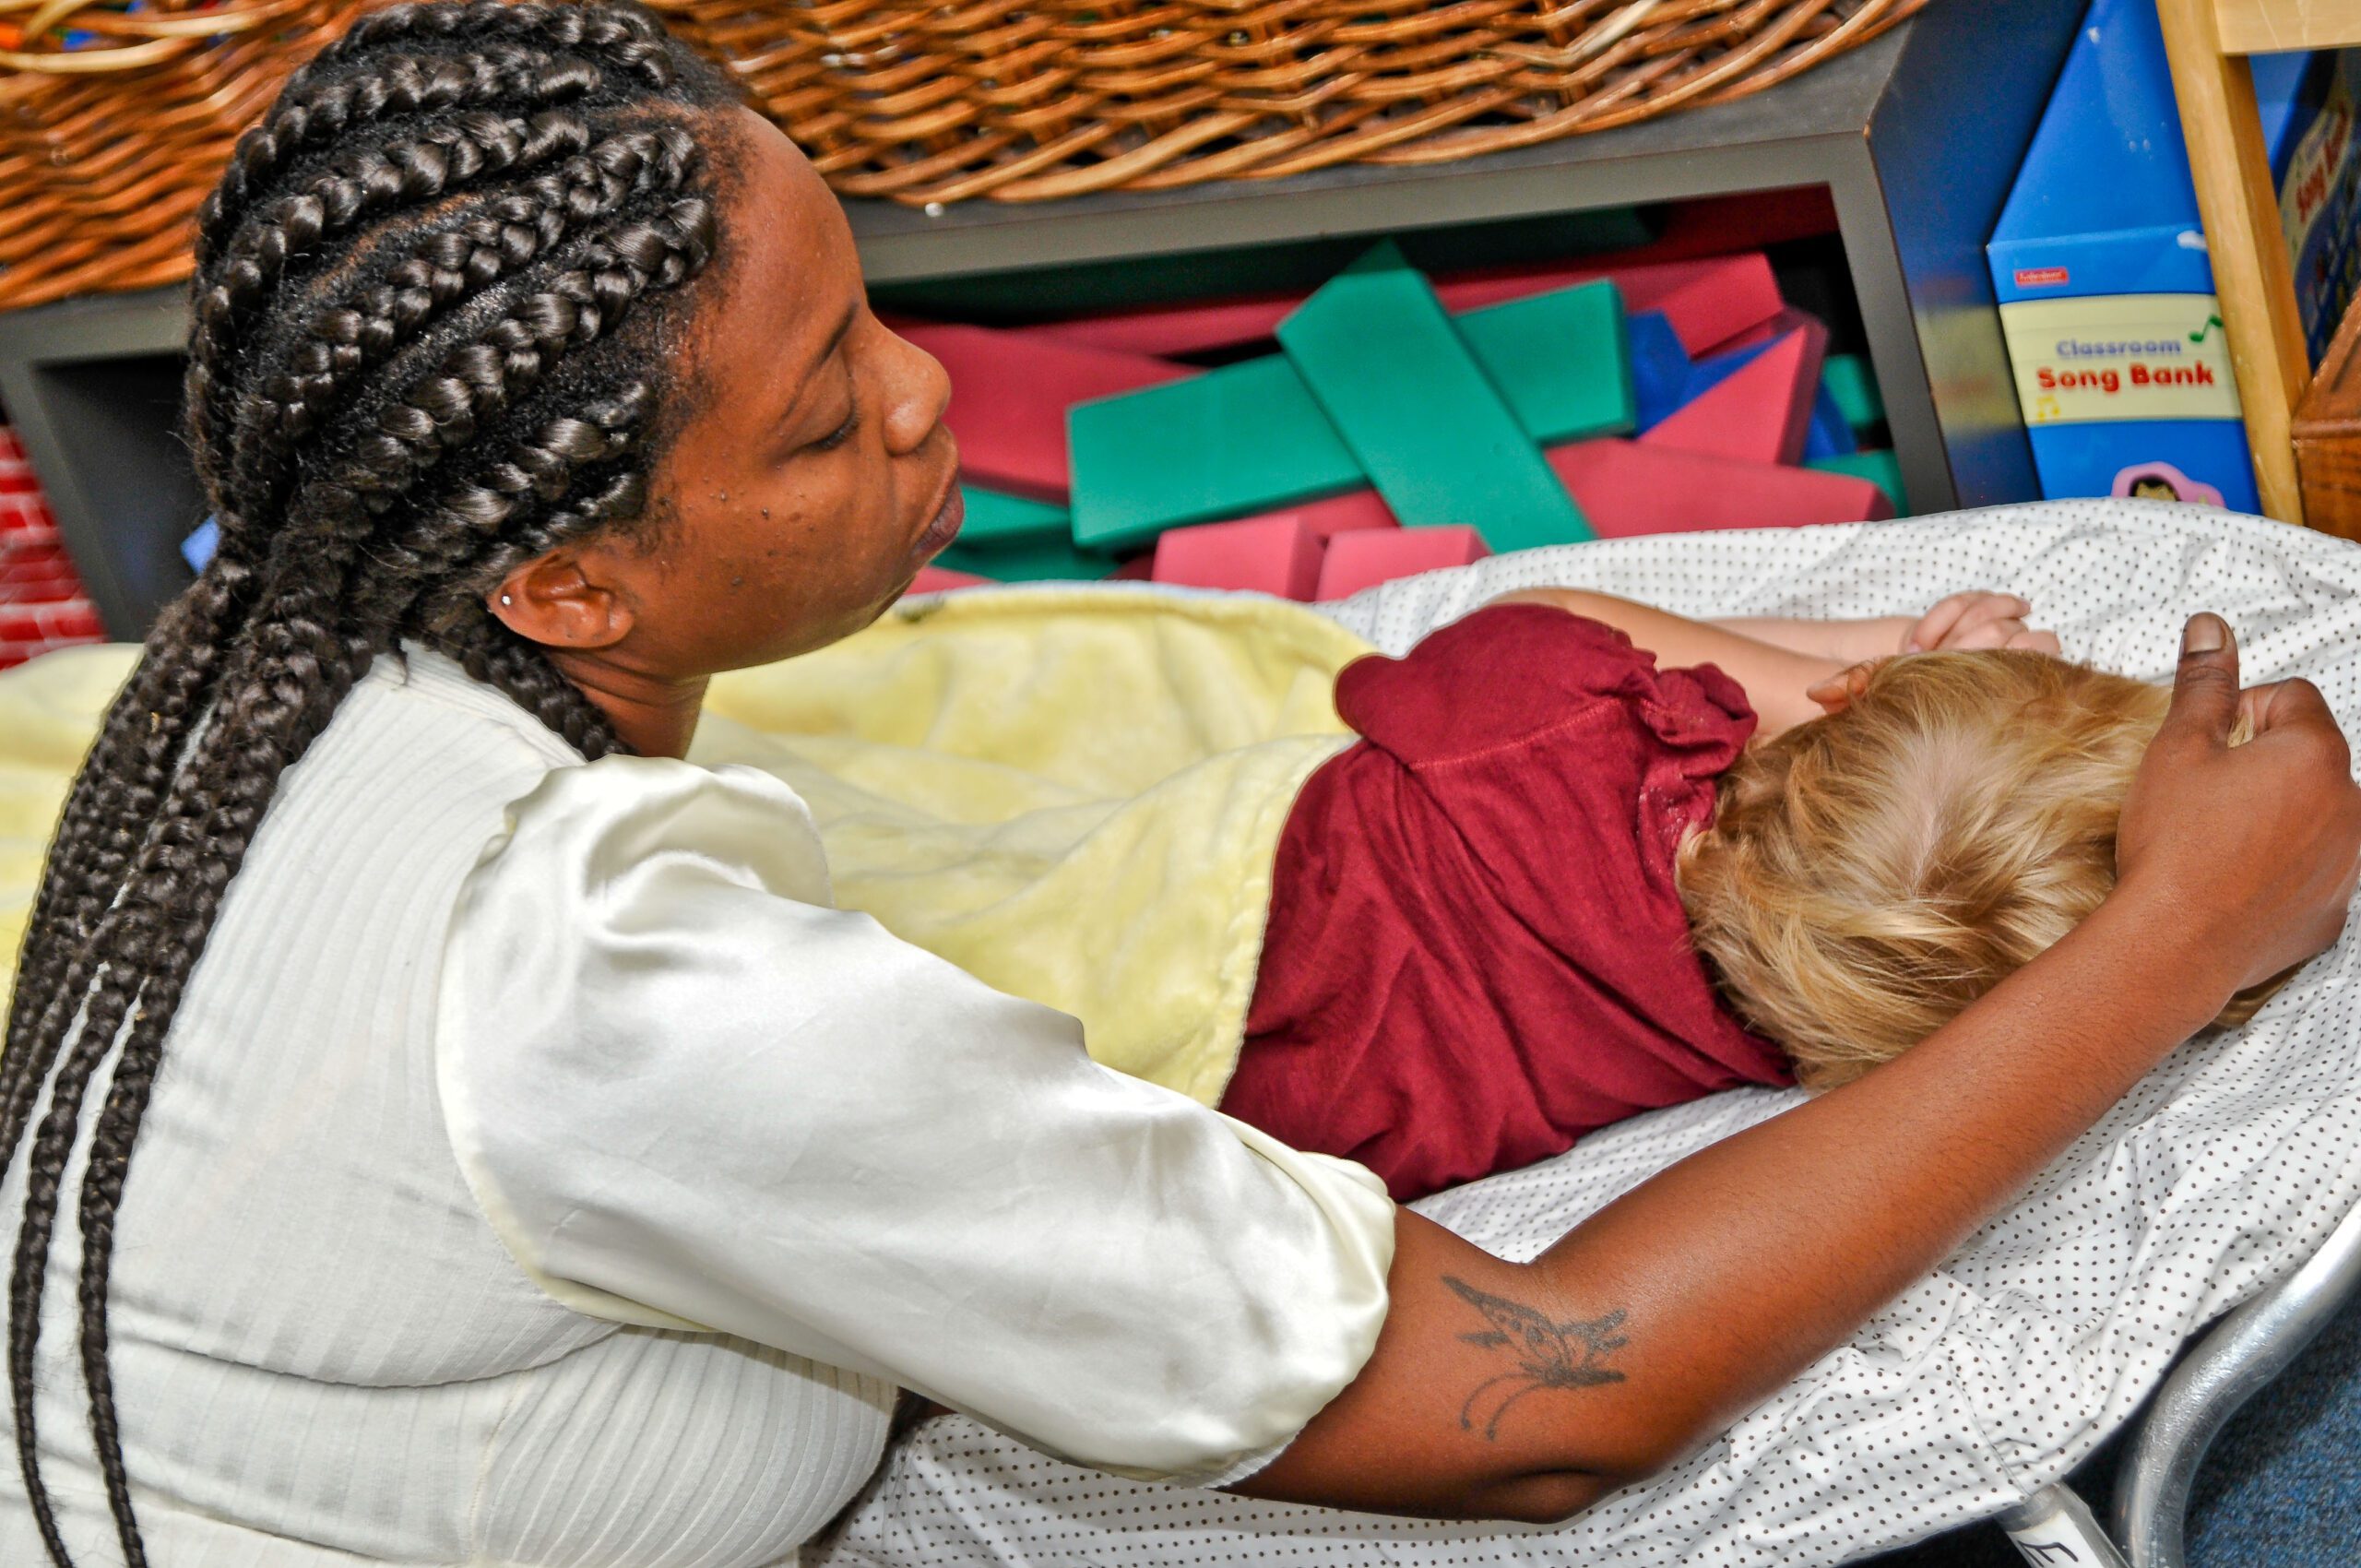 Provider calms a child during naptime